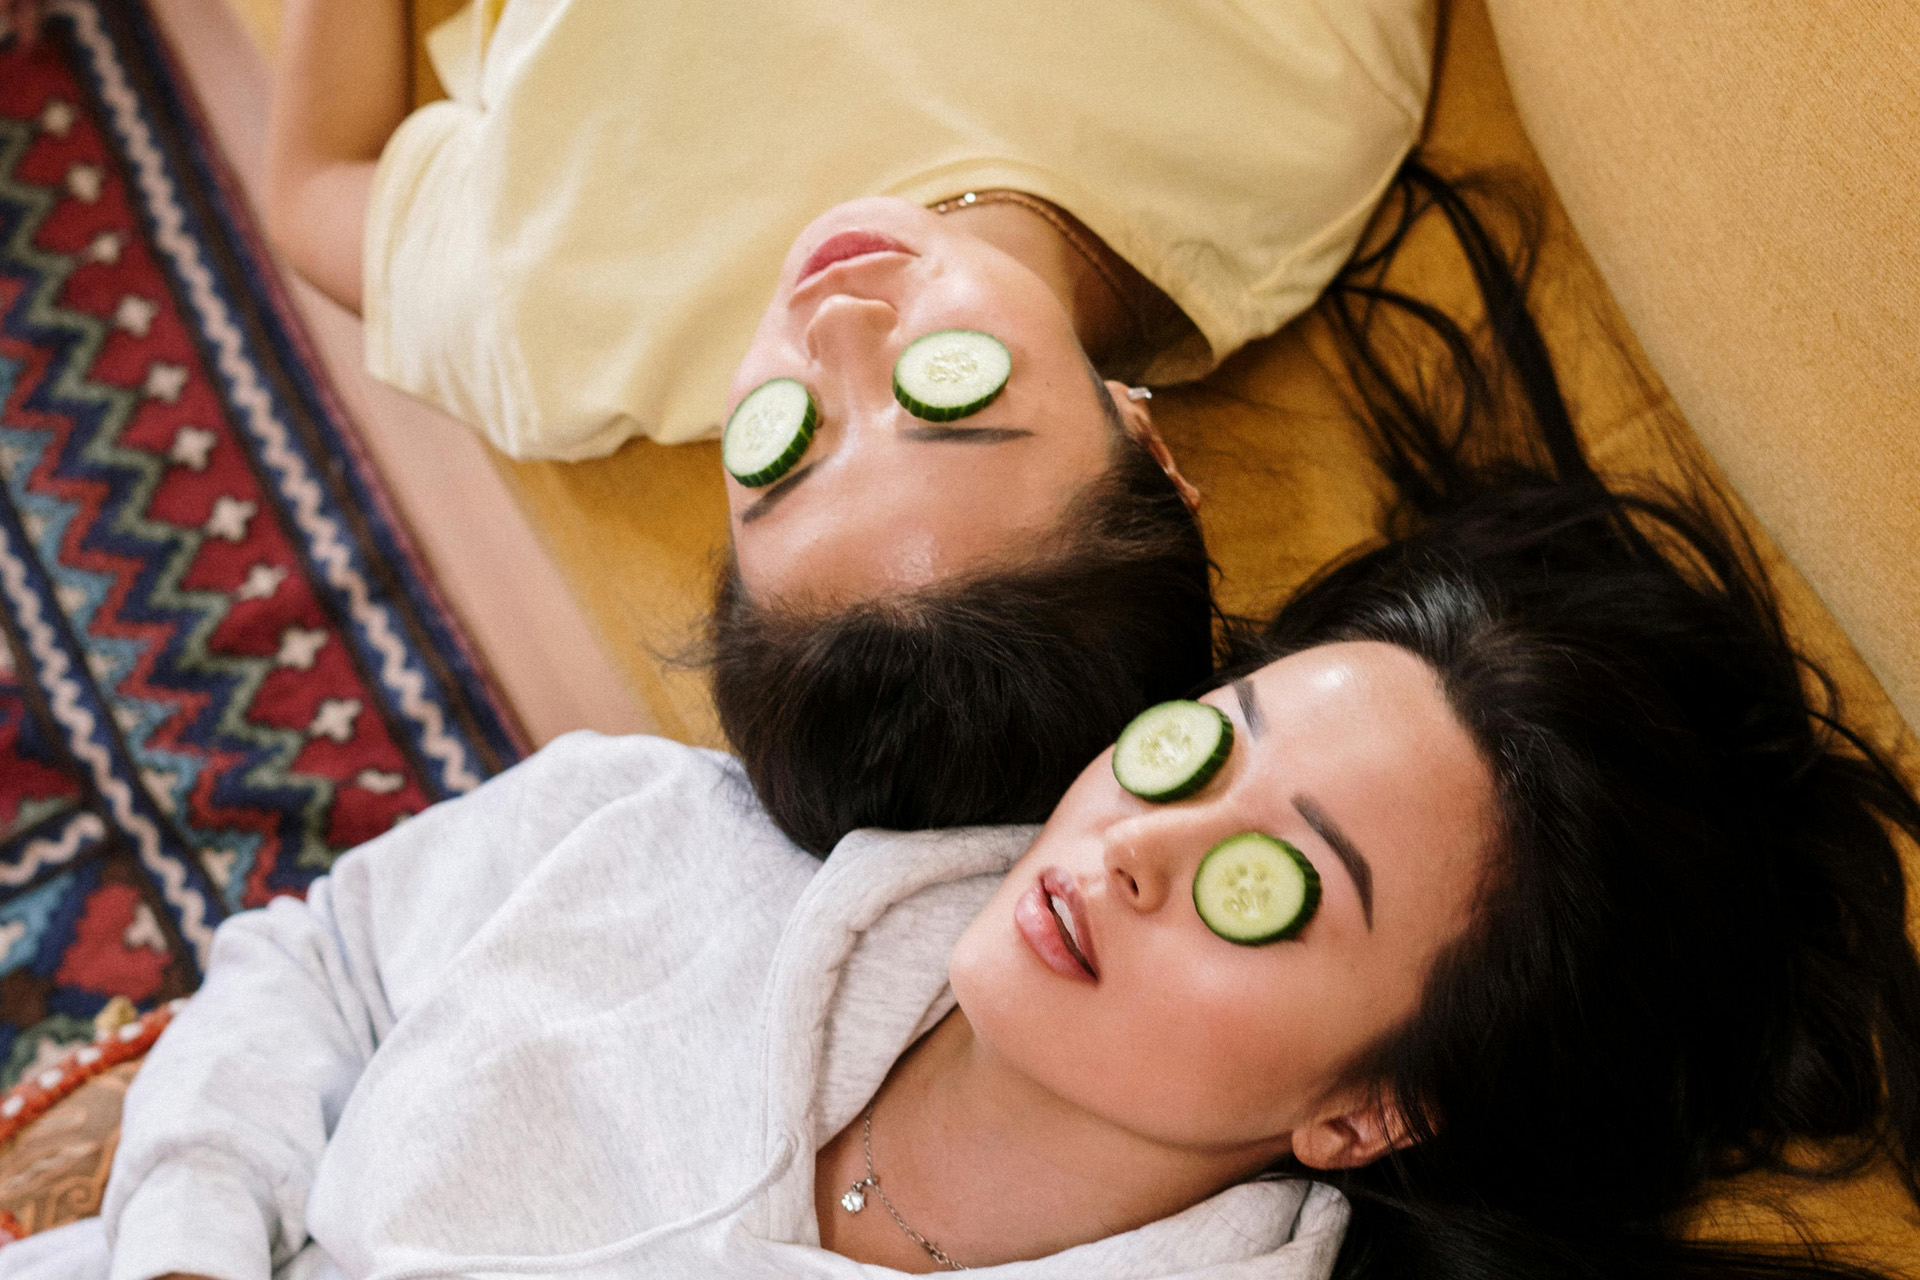 Two people at home with cucumber slices over their eyes